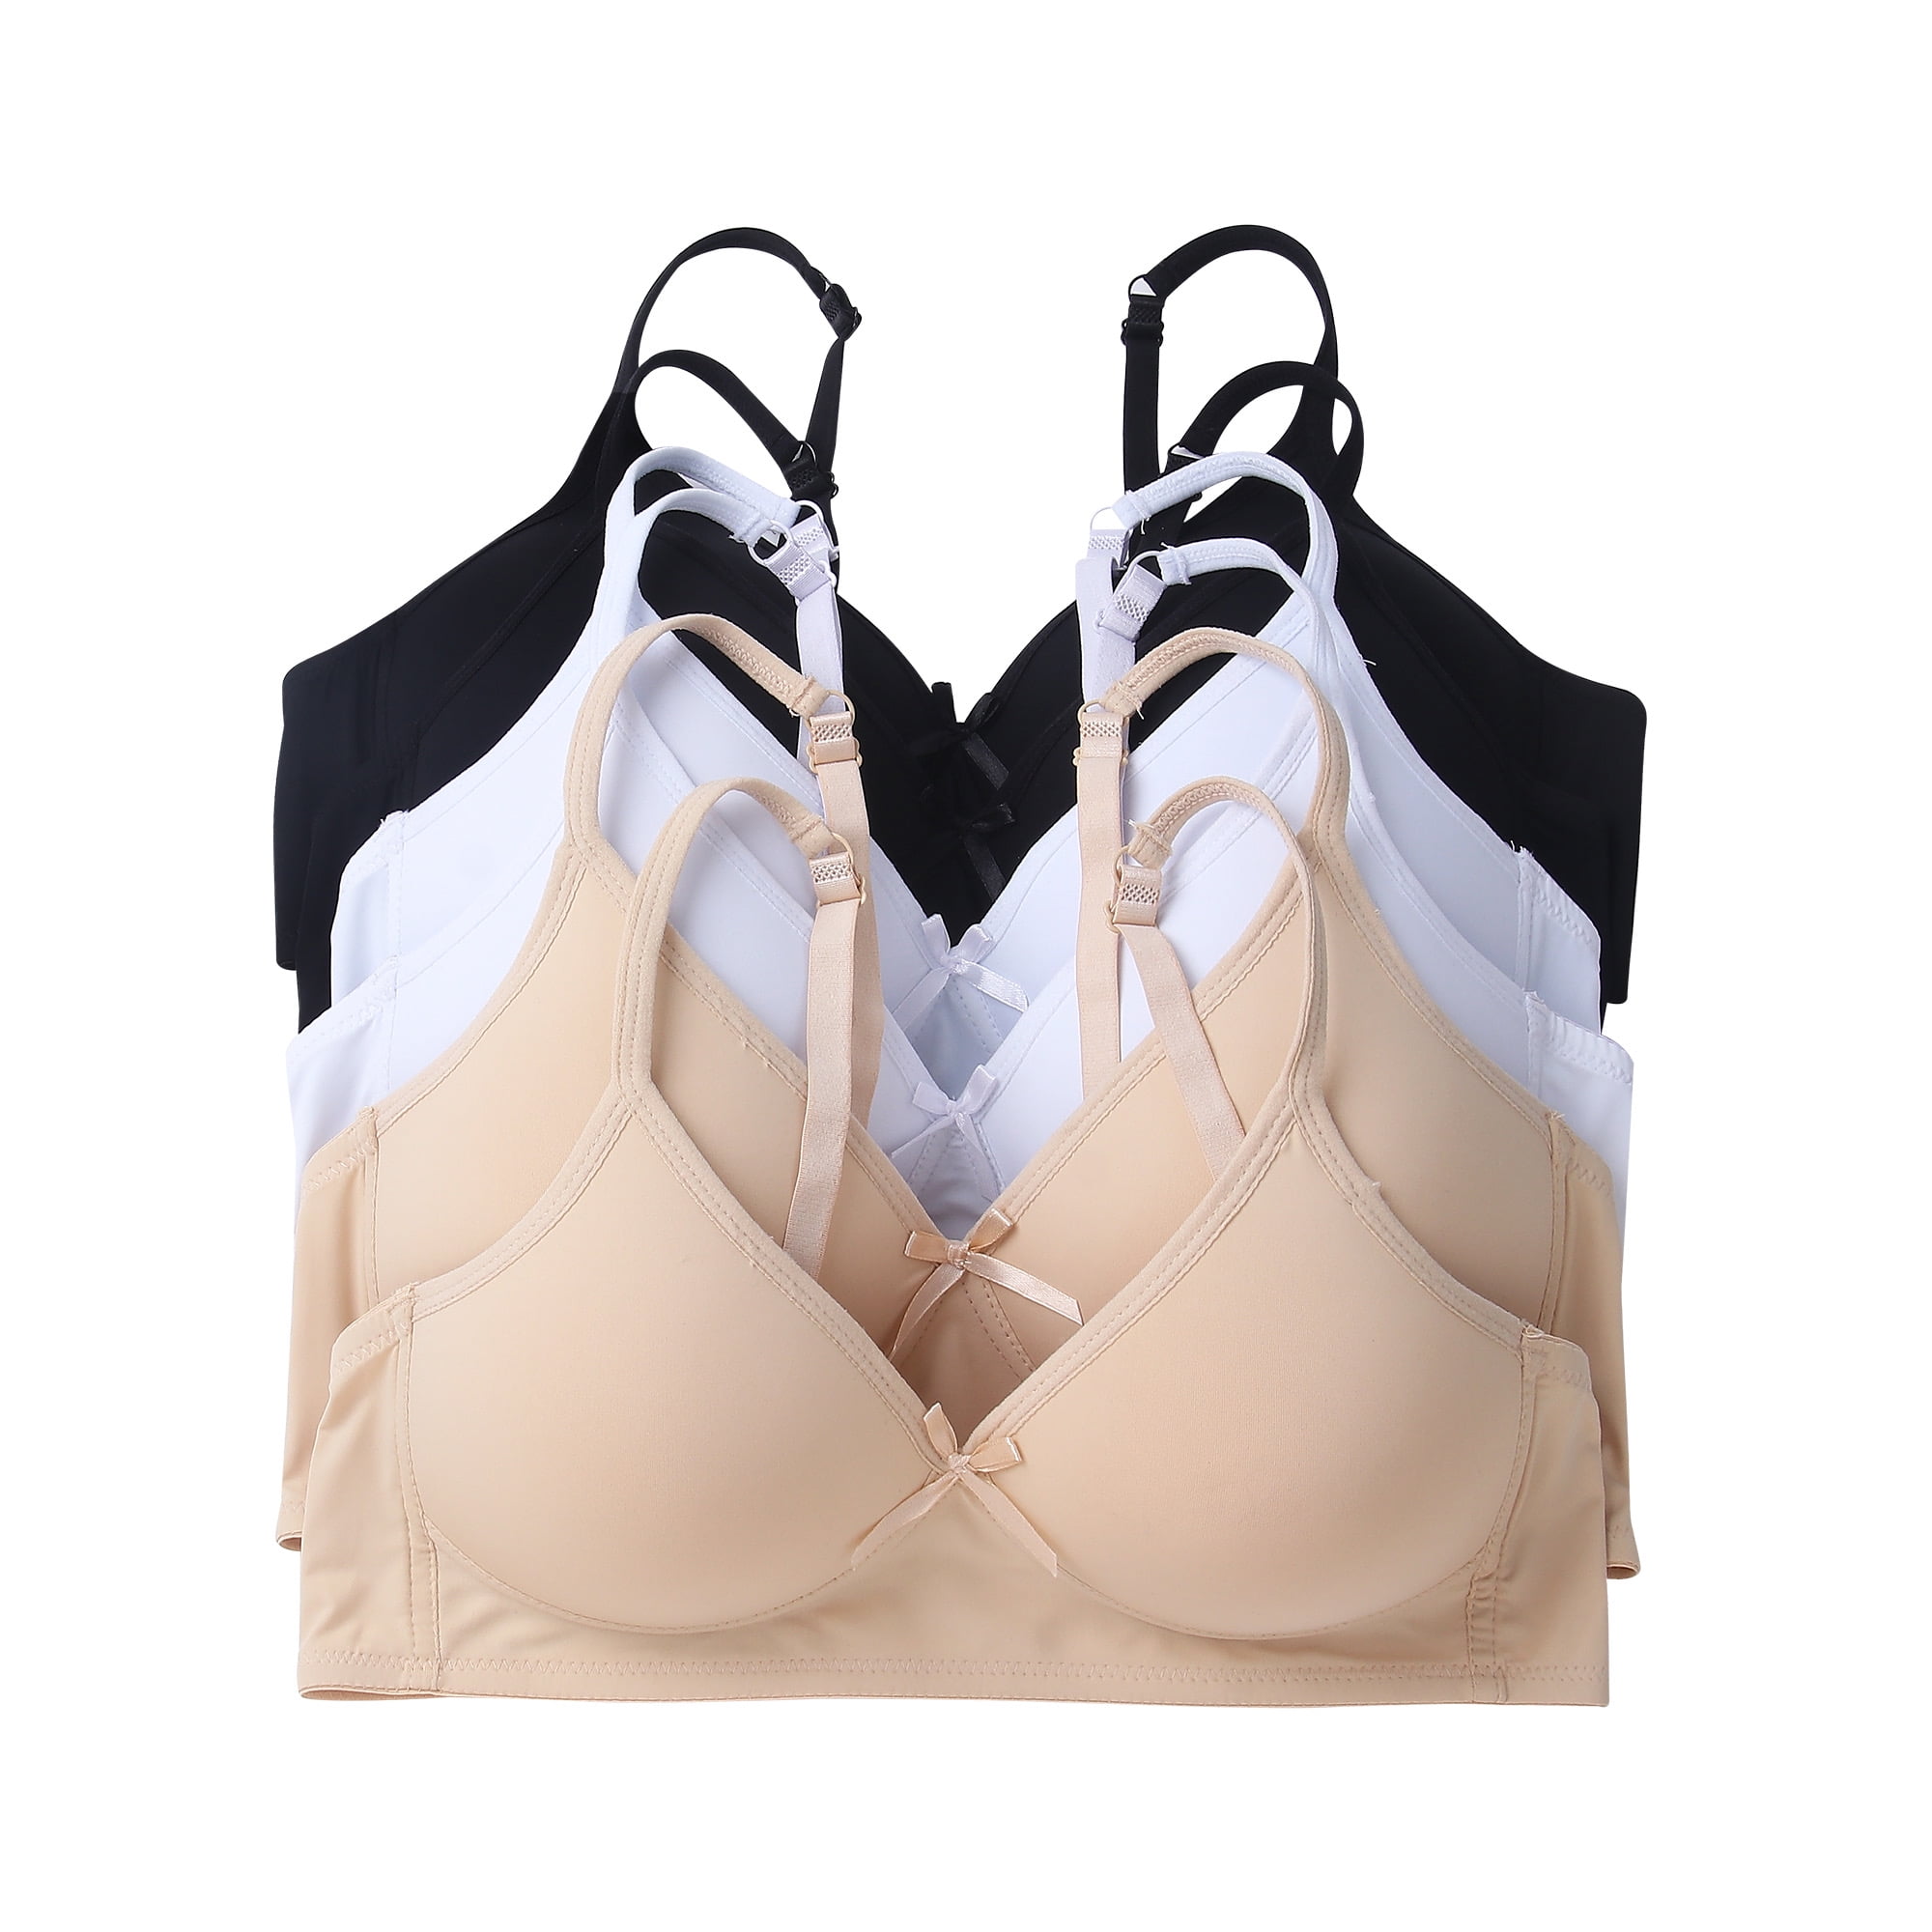 Women Bras 6 pack of Basic No Wire Free Wireless Bra B cup C cup Size 36C  (S6319) 